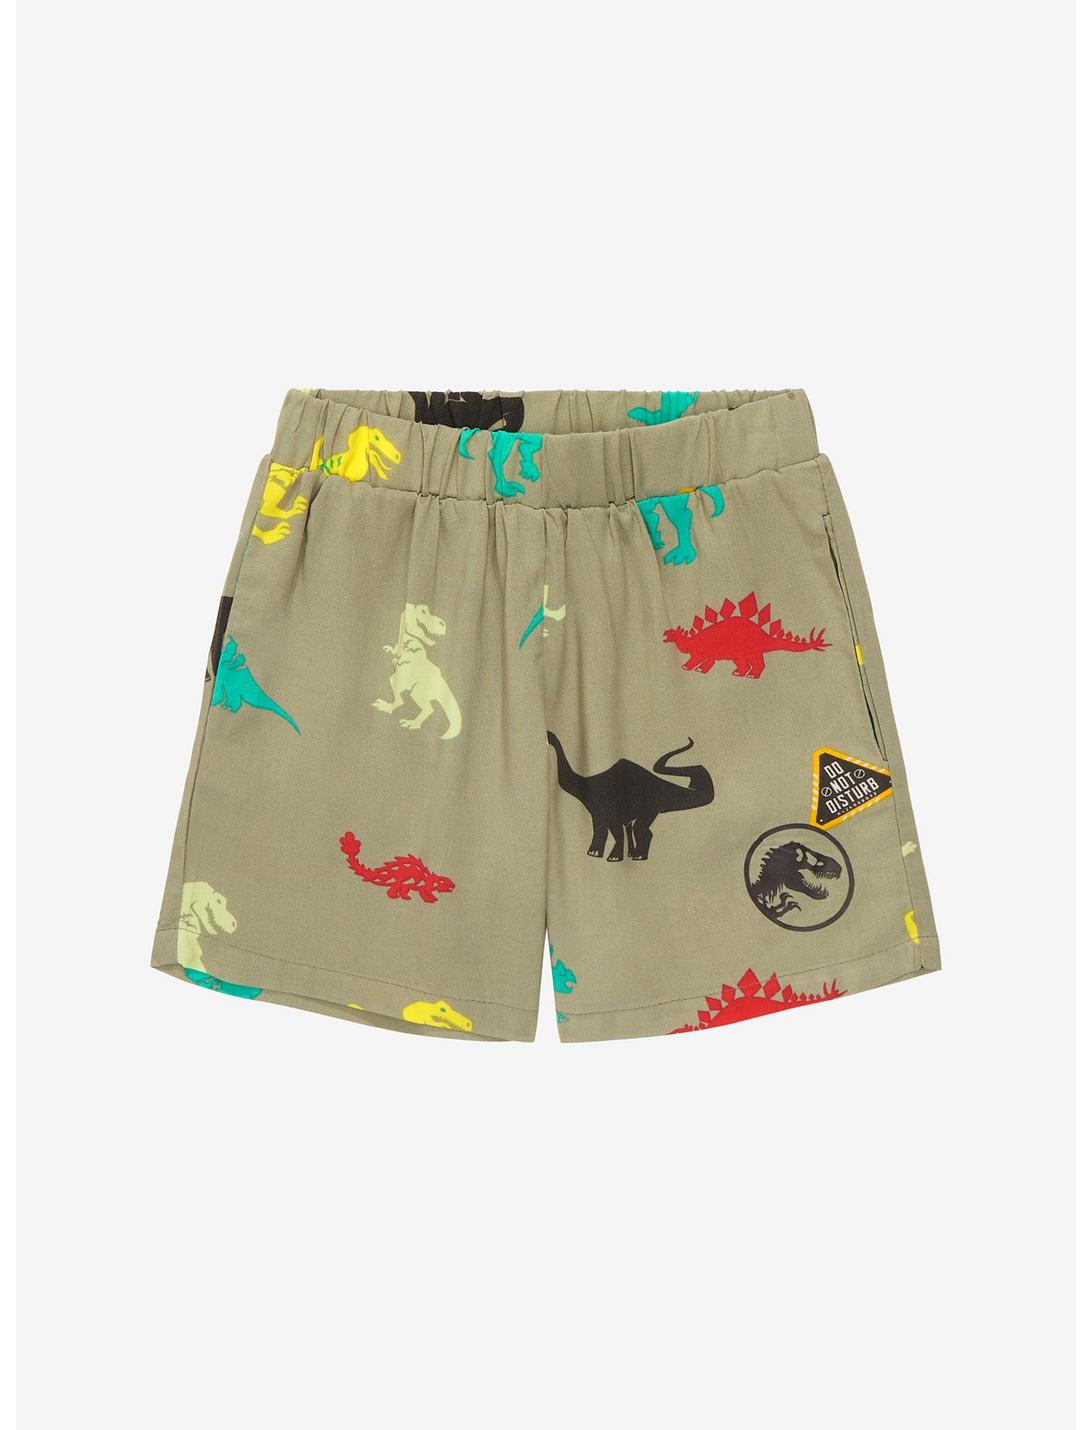 Jurassic Park Dinosaurs Allover Print Toddler Shorts - BoxLunch Exclusive, ARTICHOKE, hi-res